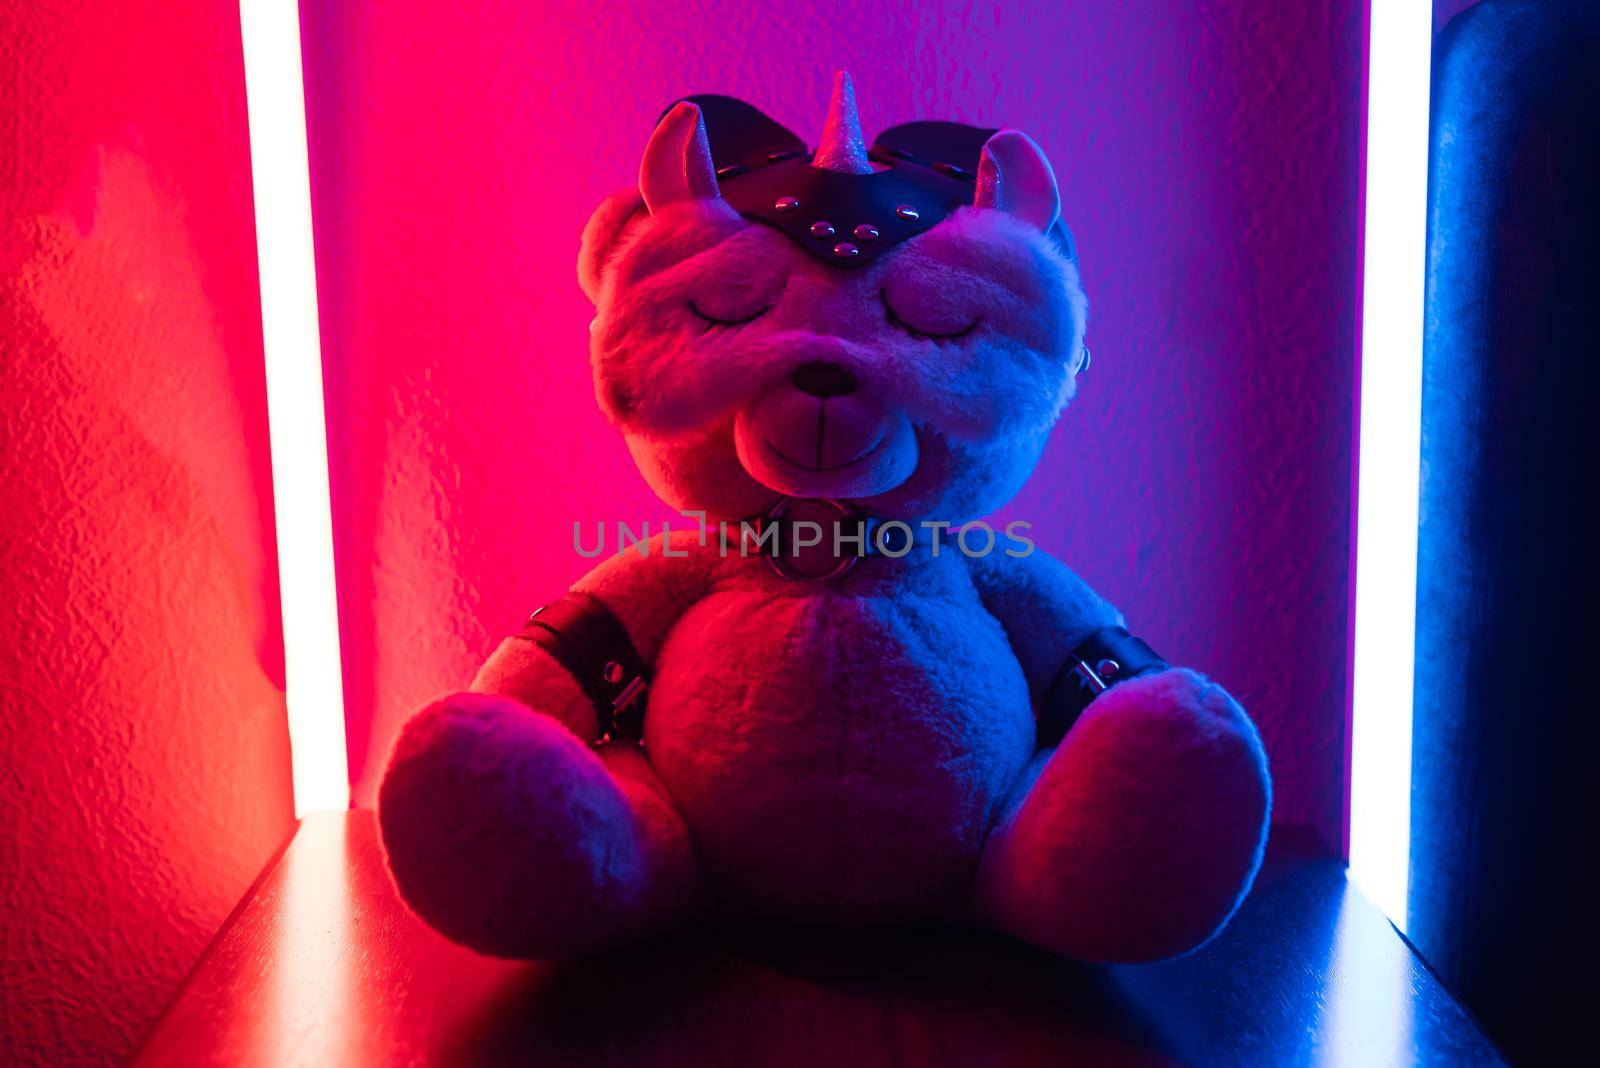 the toy teddy bear dressed in leather straps and a mask, an accessory for BDSM games in a sleep mask